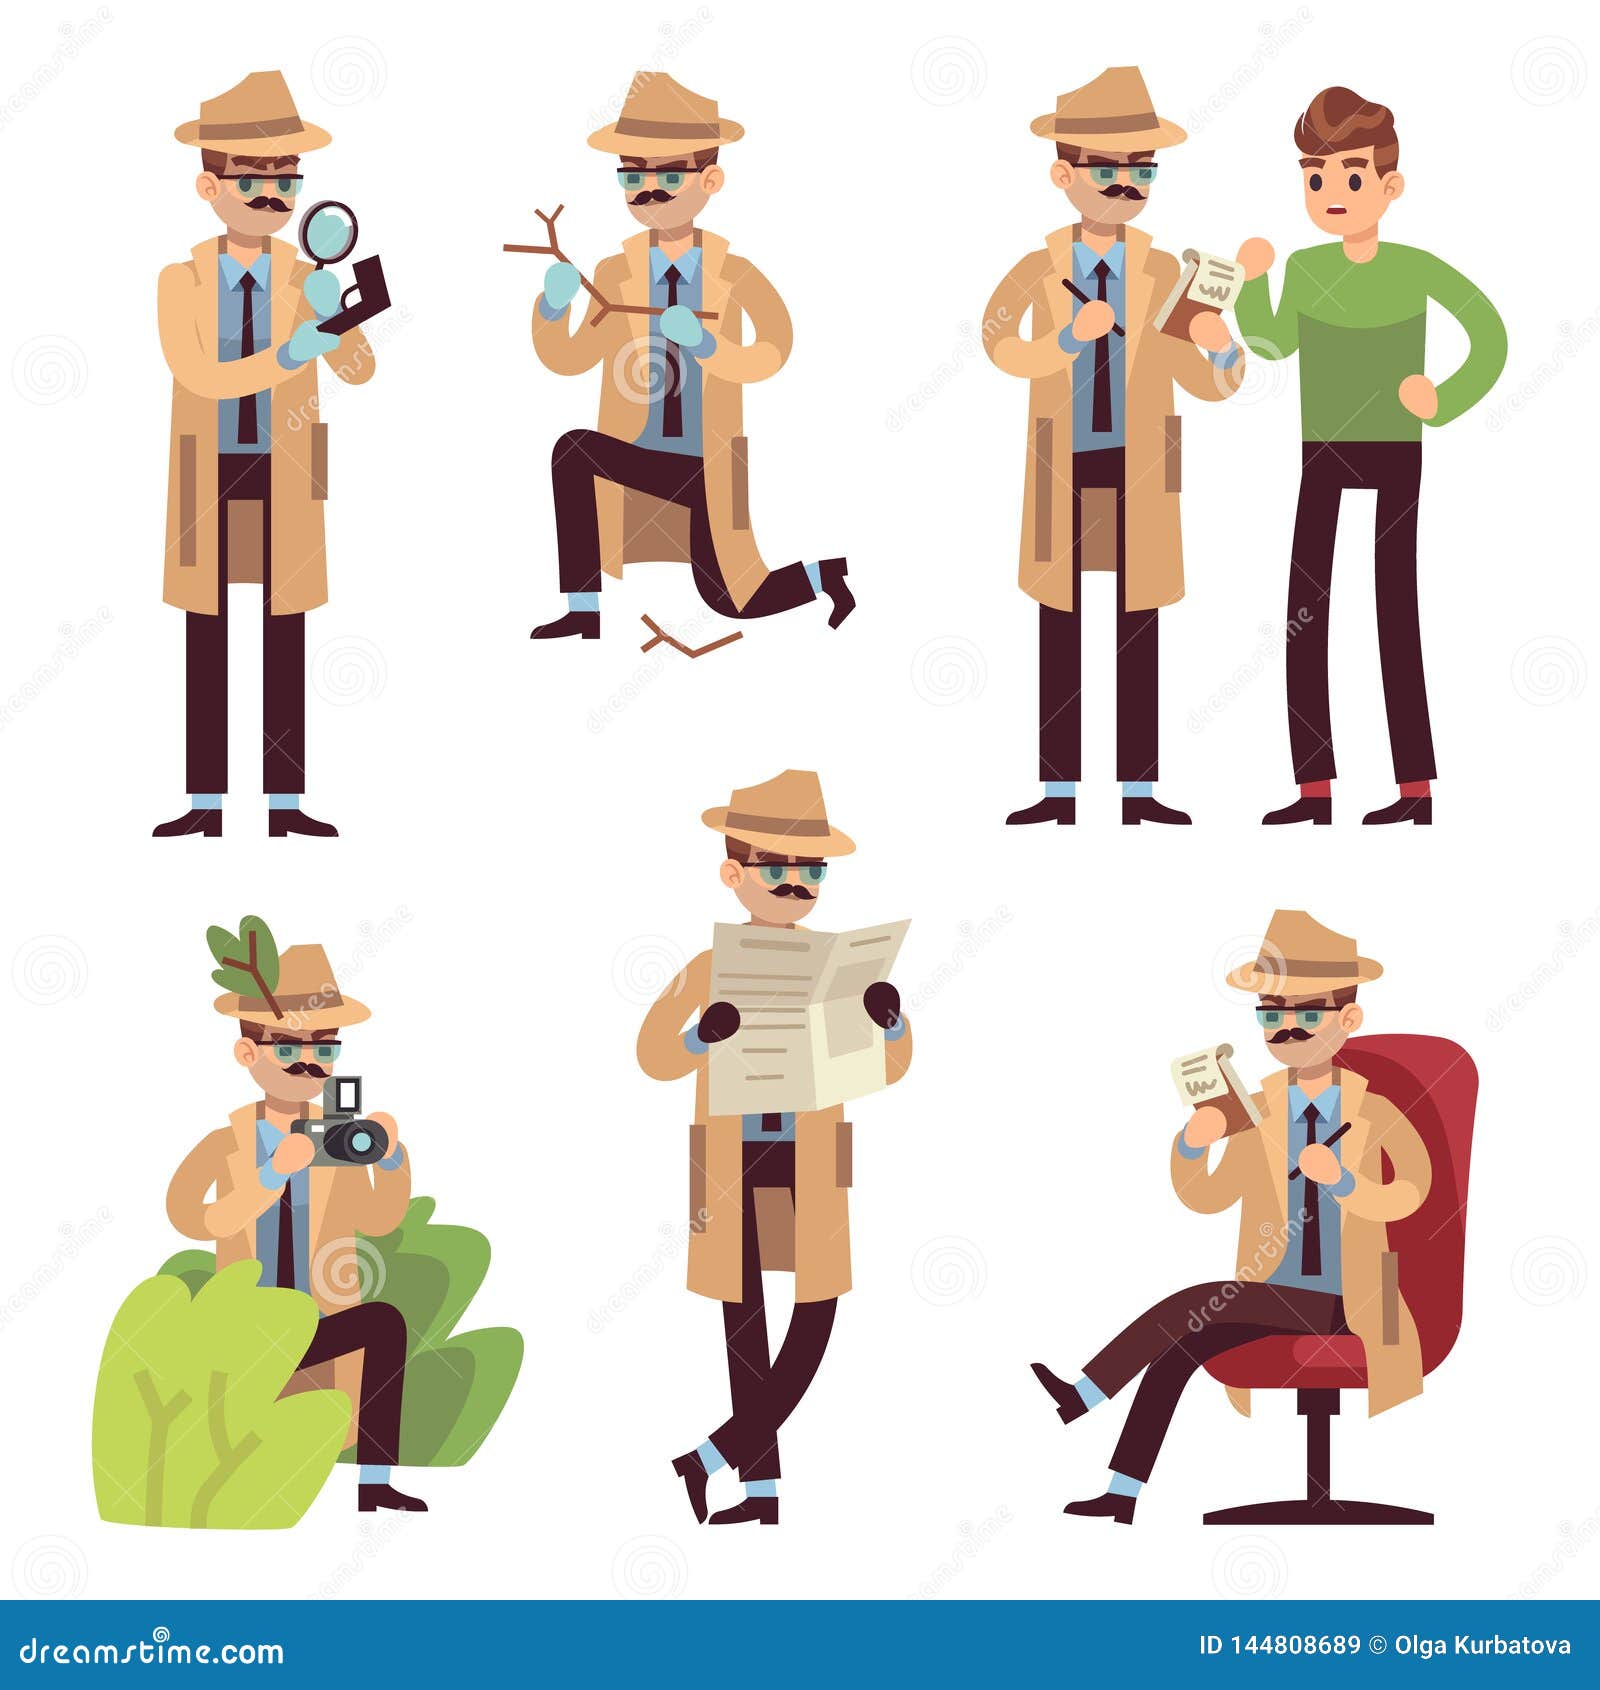 detective character. police inspector looking crime photographing case search secret agent solving spy detect cartoon